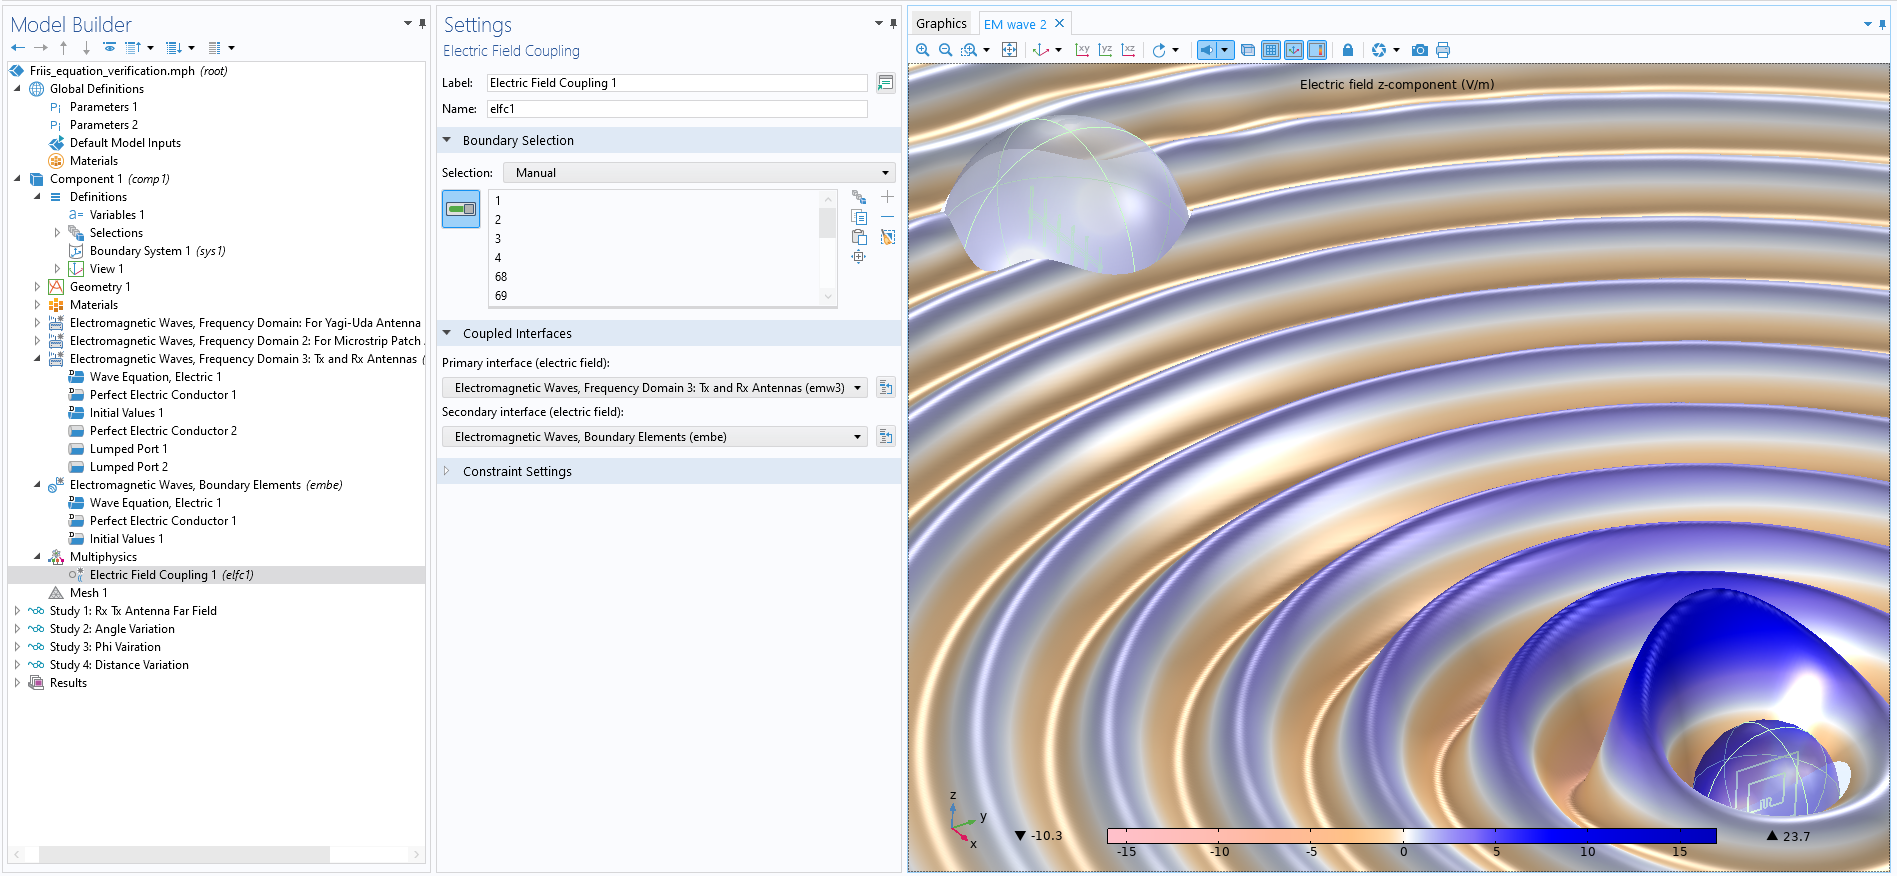 The COMSOL Multiphysics UI showing the Model Builder with the Electric Field Coupling interface selected, the corresponding Settings window, and a model of  transmitter and receiver antennas in the EM wave 2 window.